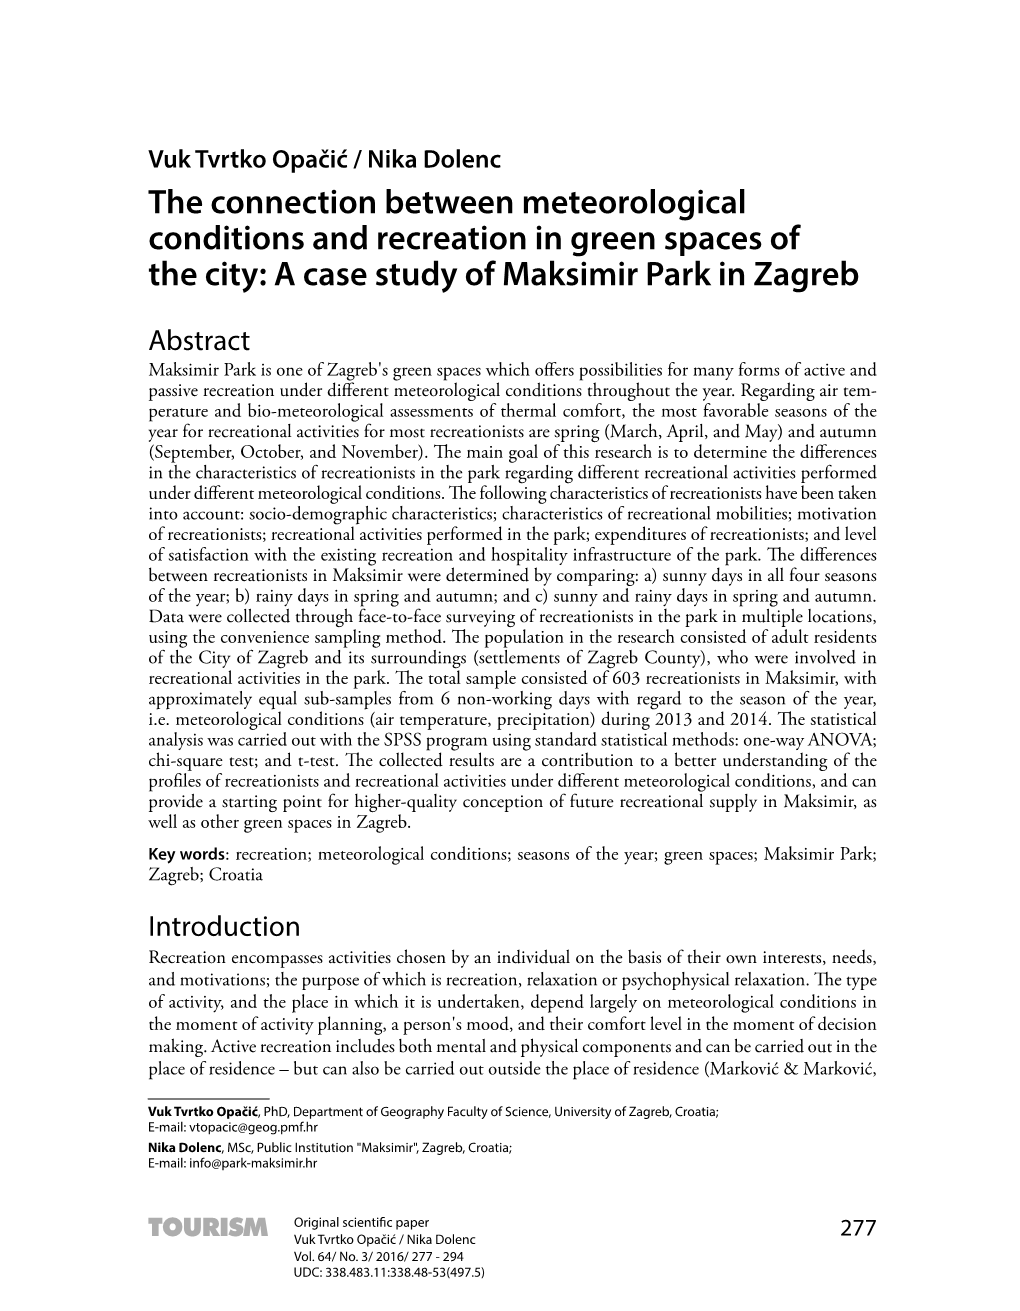 The Connection Between Meteorological Conditions and Recreation in Green Spaces of the City: a Case Study of Maksimir Park in Zagreb